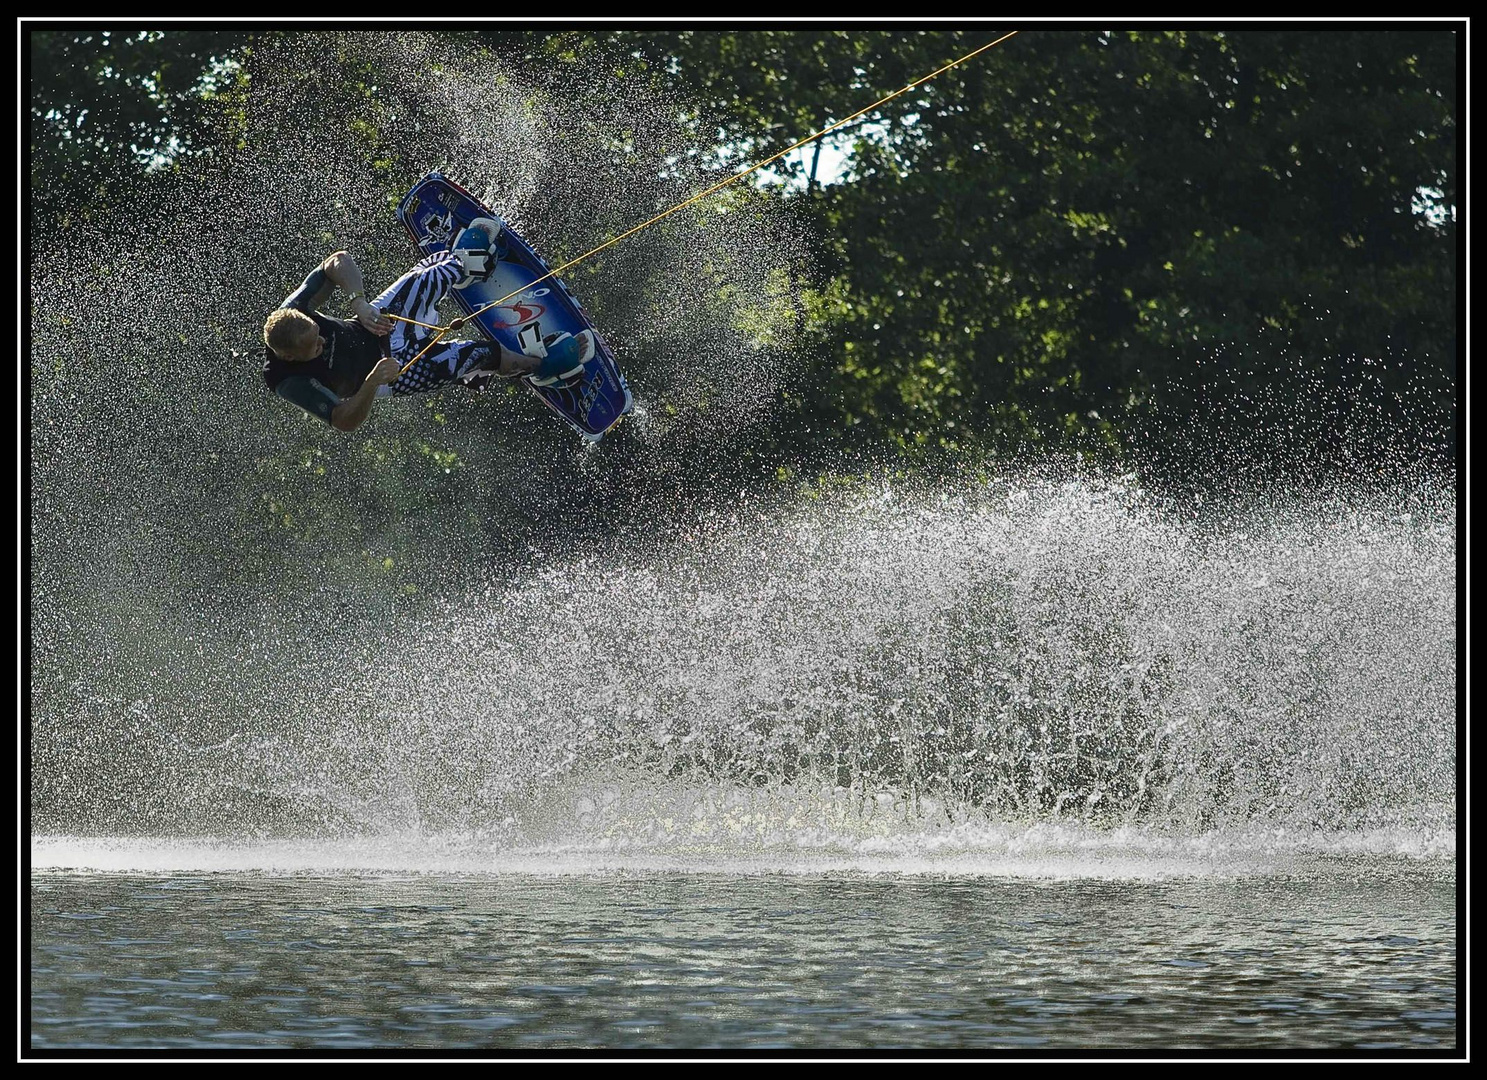 Wakeboarder in Action